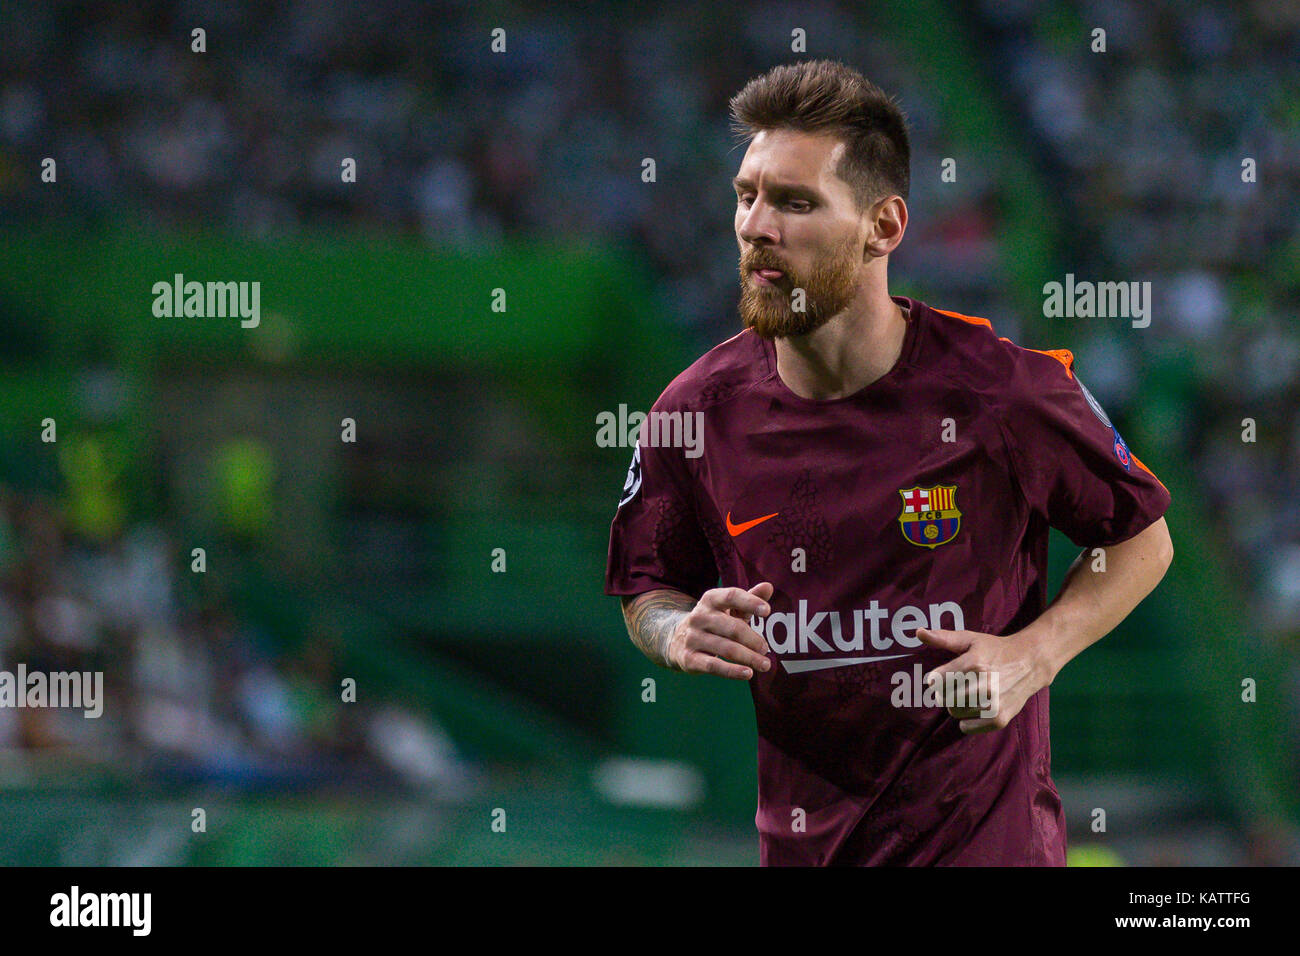 Lisbon, Portugal. 27th Sep, 2017. Barcelona's forward from Argentina Lionel Messi (10) during the game of the 2nd round of the UEFA Champions League Group D, Sporting CP v FC Barcelona Credit: Alexandre de Sousa/Alamy Live News Stock Photo